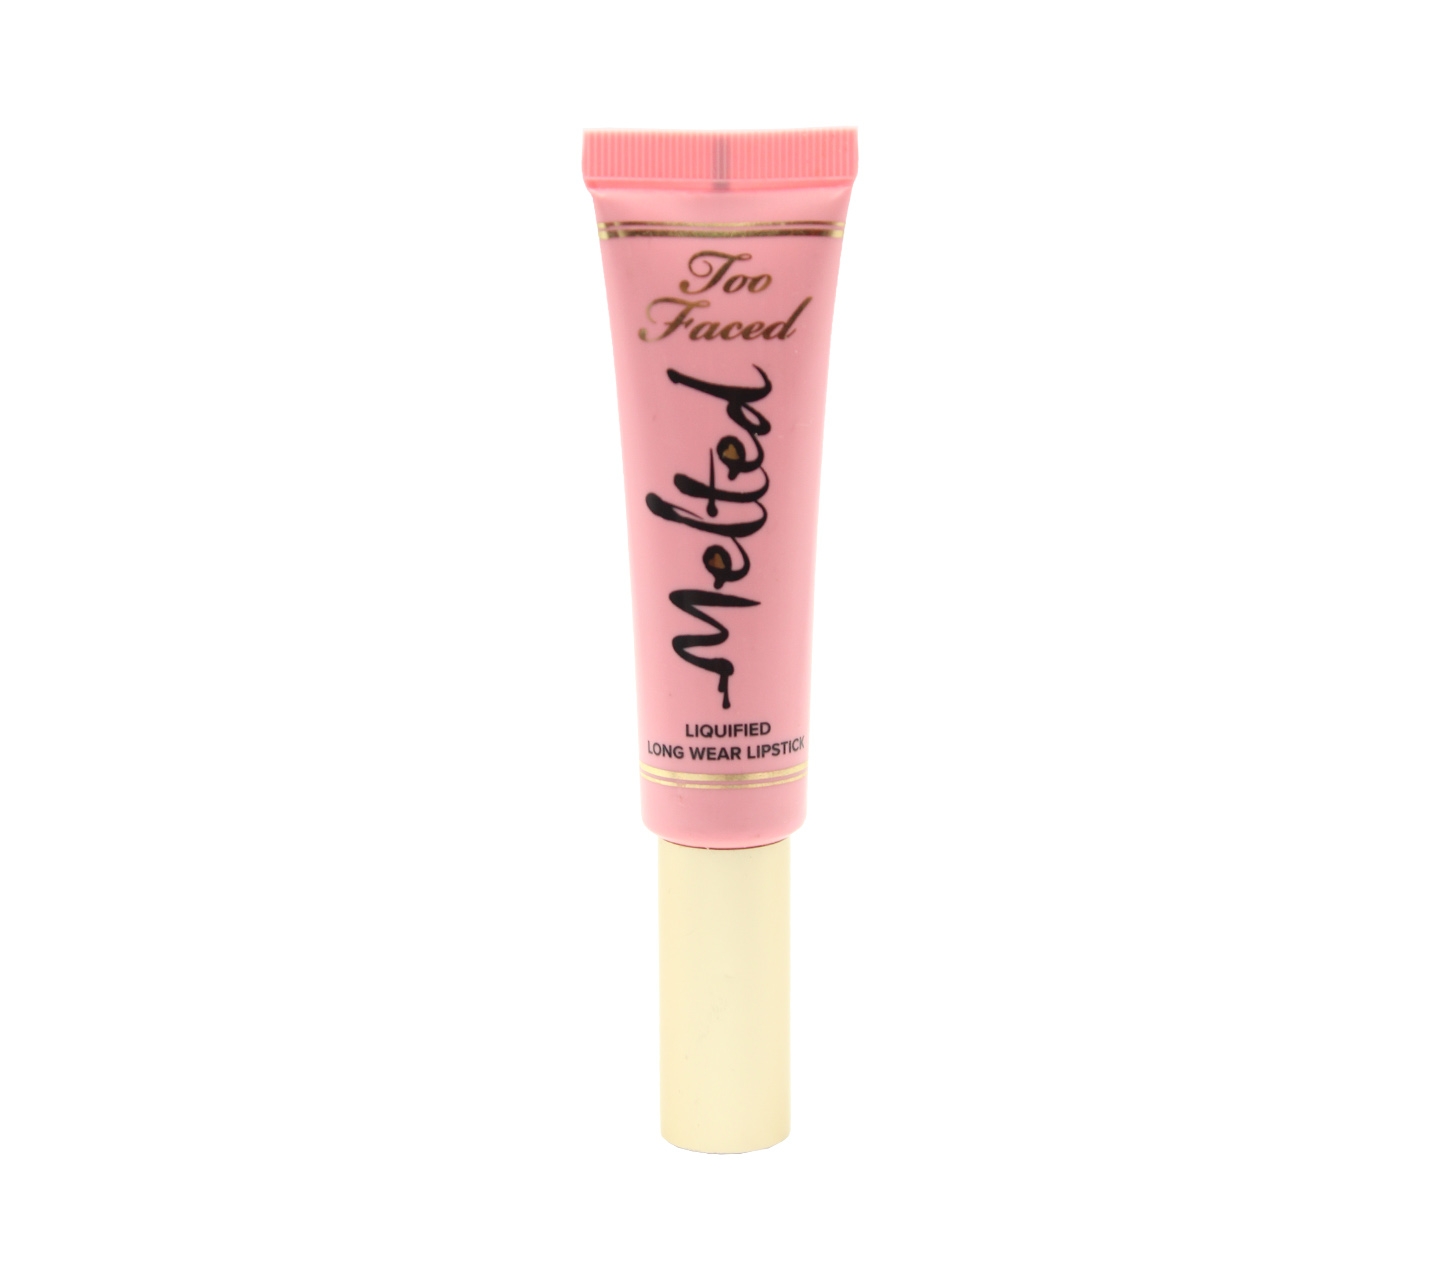 Too Faced Melted Liquifed Long Wear Lipstik Peony Lips